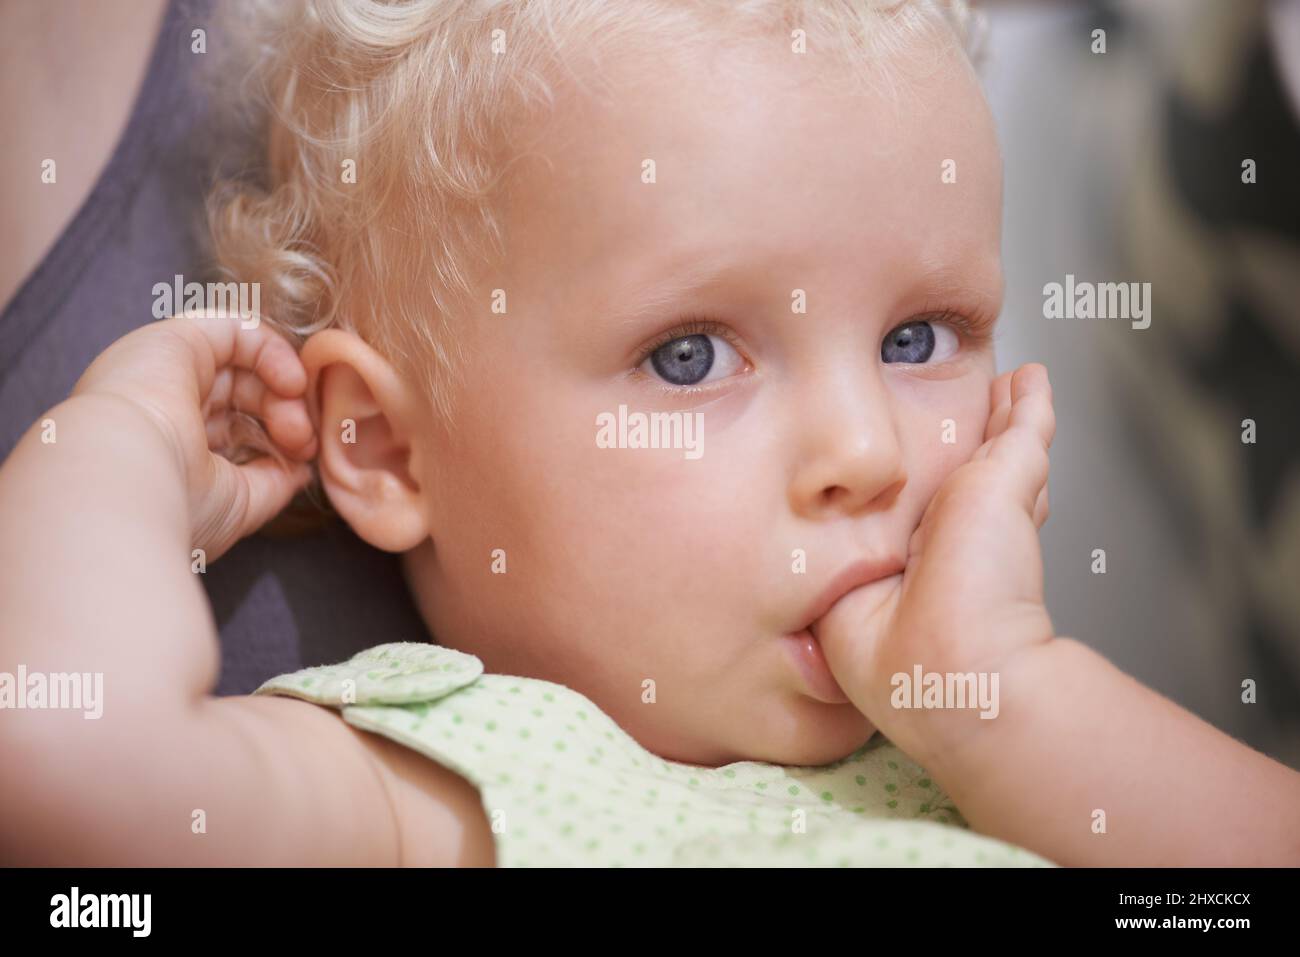 2. Adorable Toddler Girl with Curly Blonde Hair - wide 4